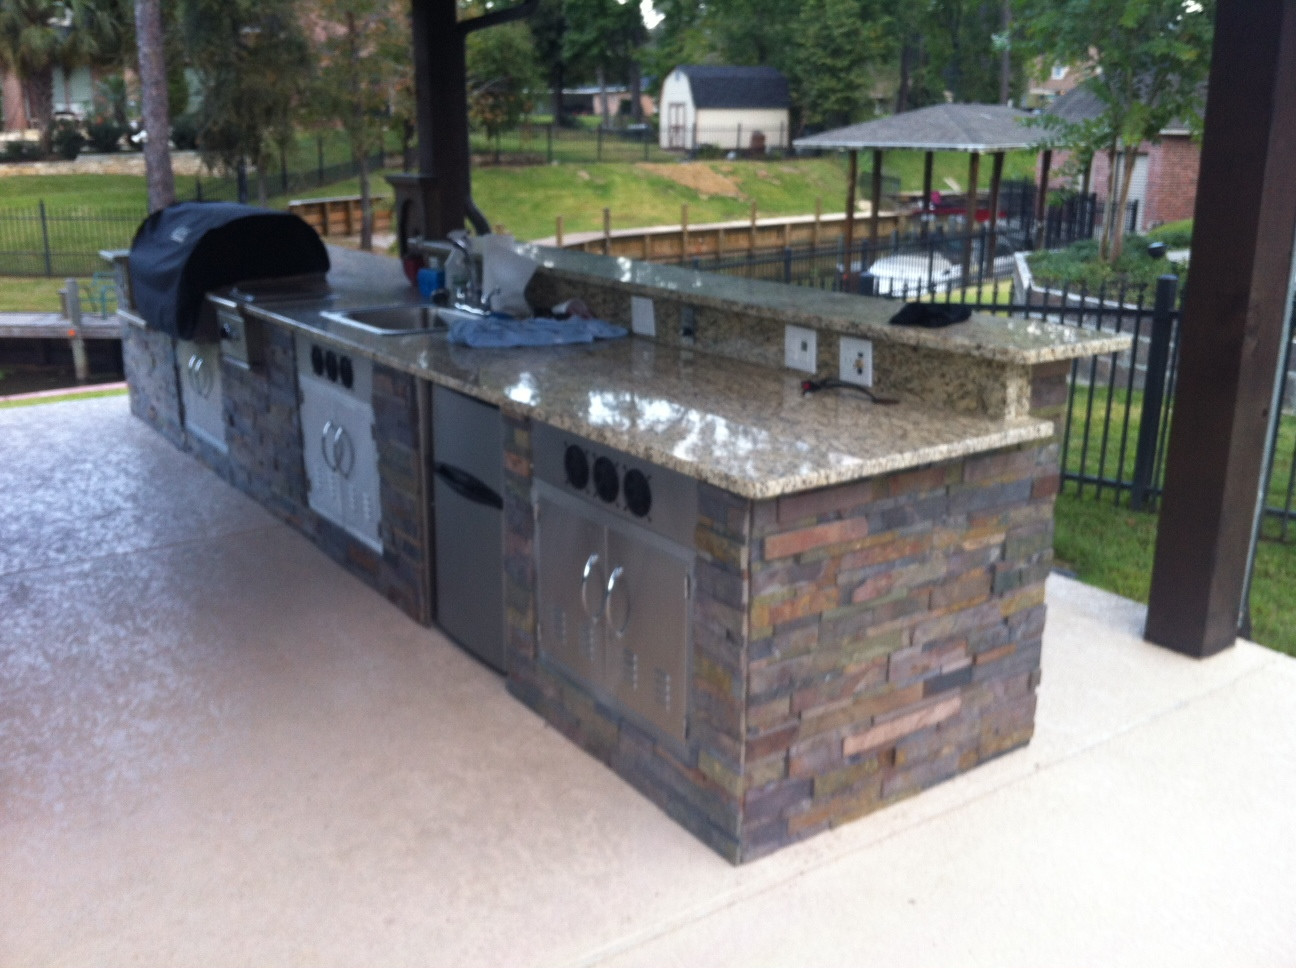 Diy Outdoor Kitchen Kits
 Just about done with my outdoor kitchen DIY granite